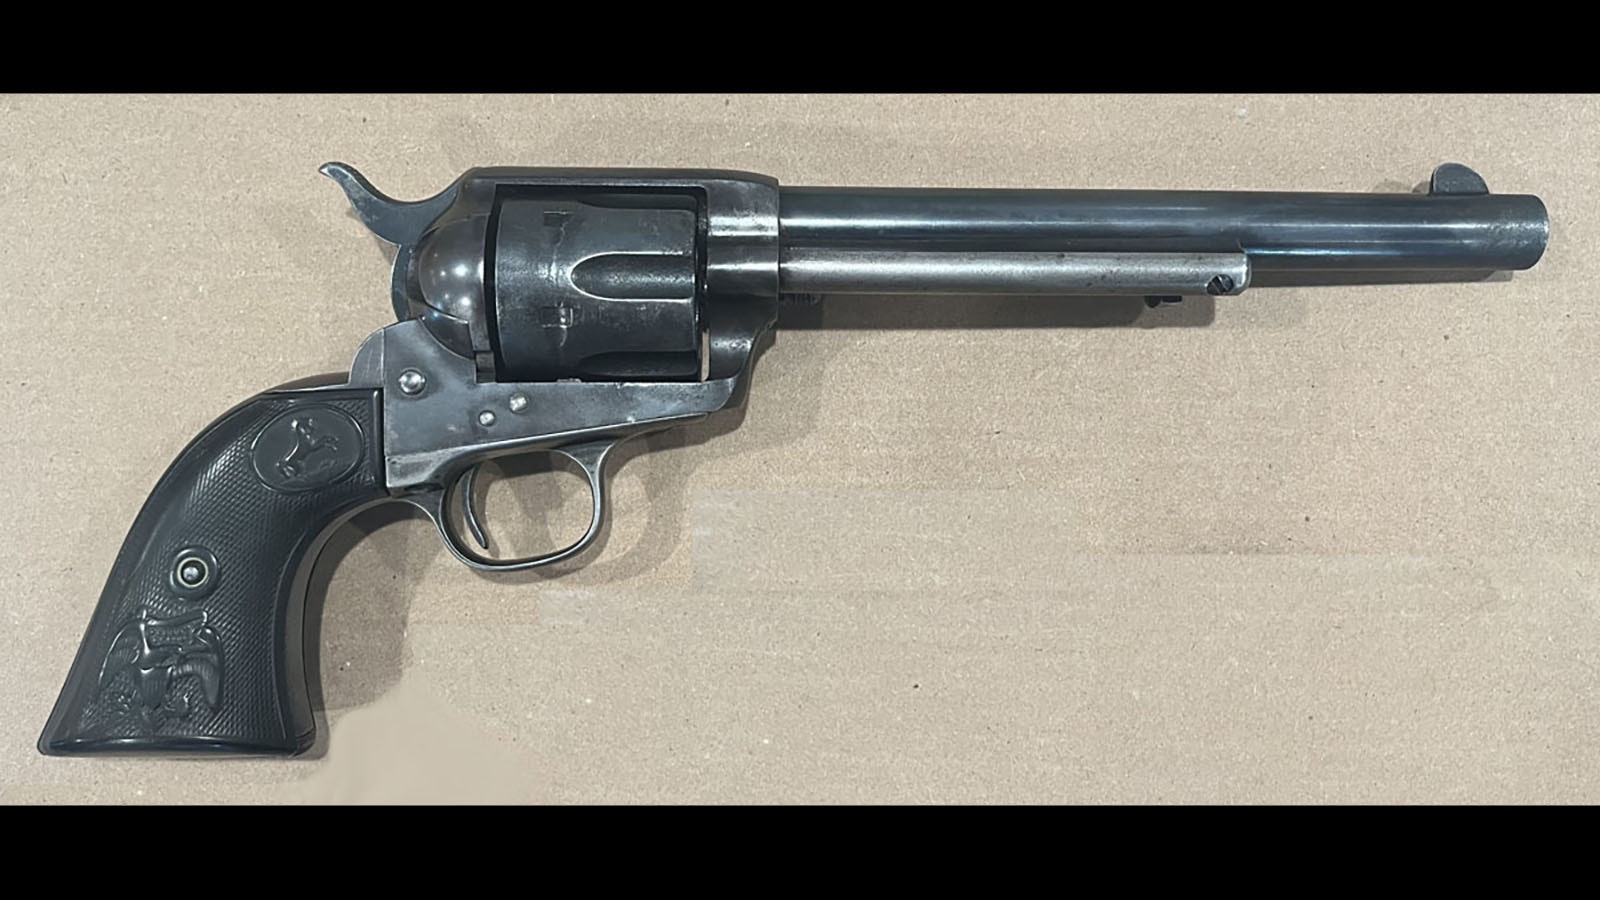 This “Hat Creek” Colt Single-Action Army Revolver in British Columbia with a link to Wyoming history is being researched through the Sweetwater County Historical Museum’s Vintage Firearms Research Program.